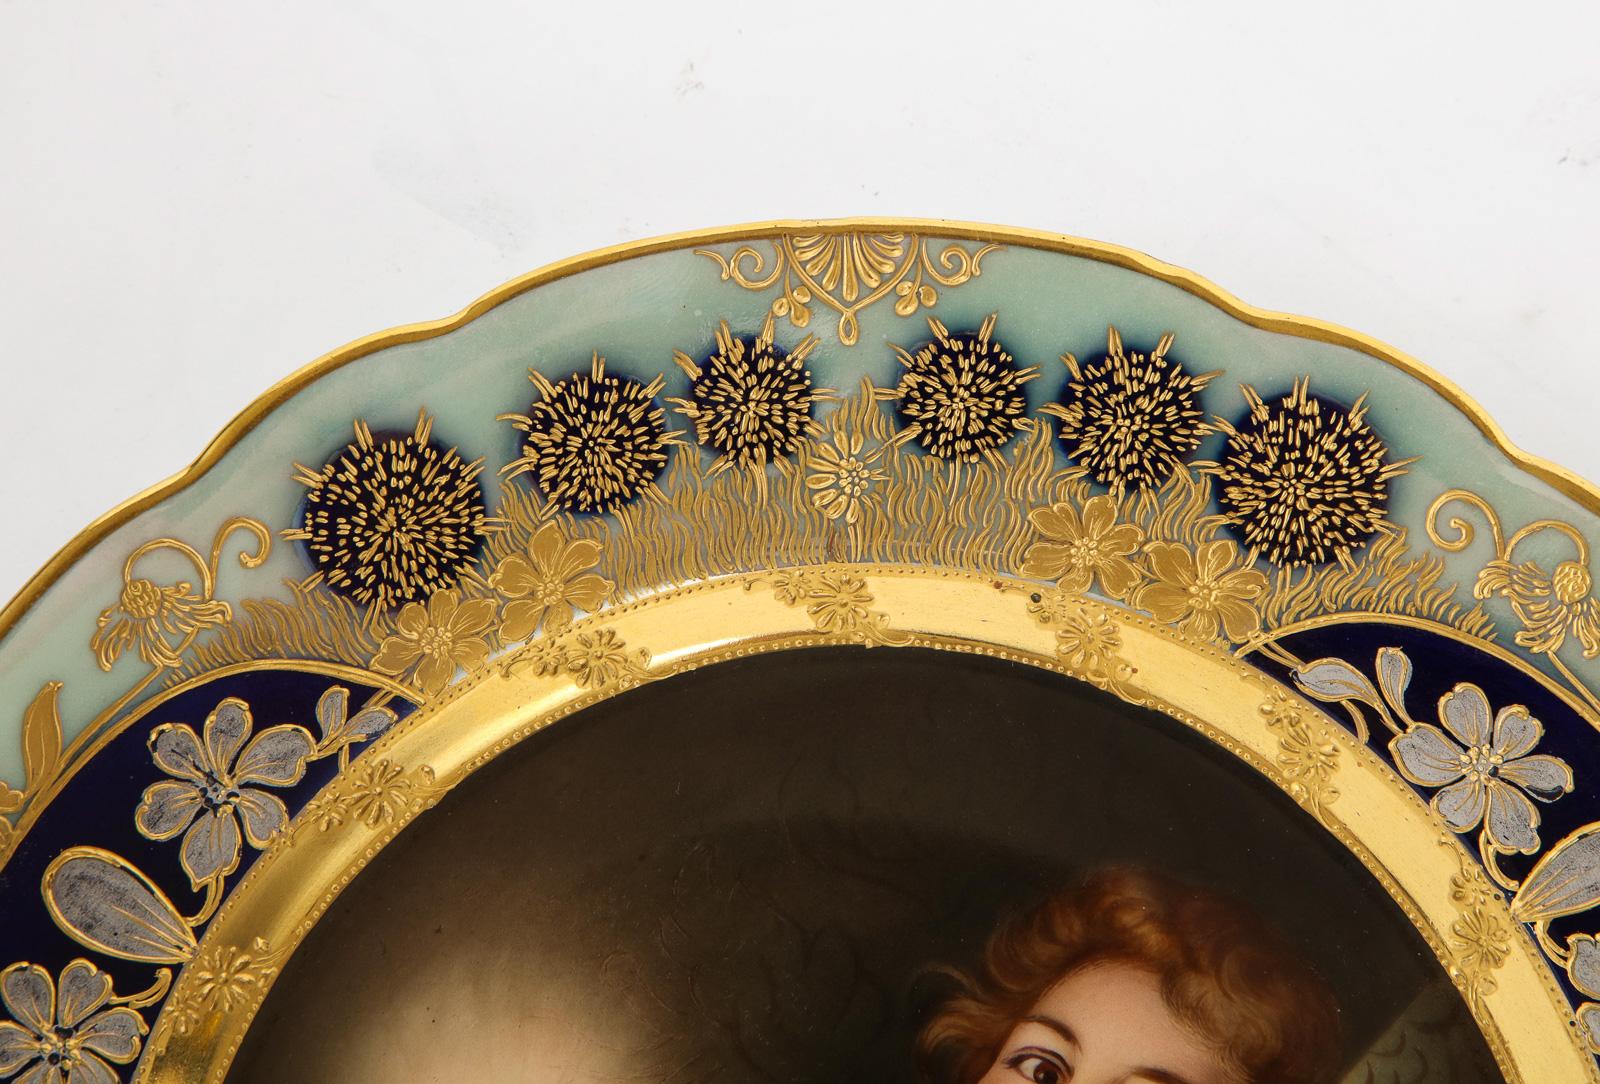 Rare and Exceptional Art Nouveau Royal Vienna Porcelain Plate by Wagner 4